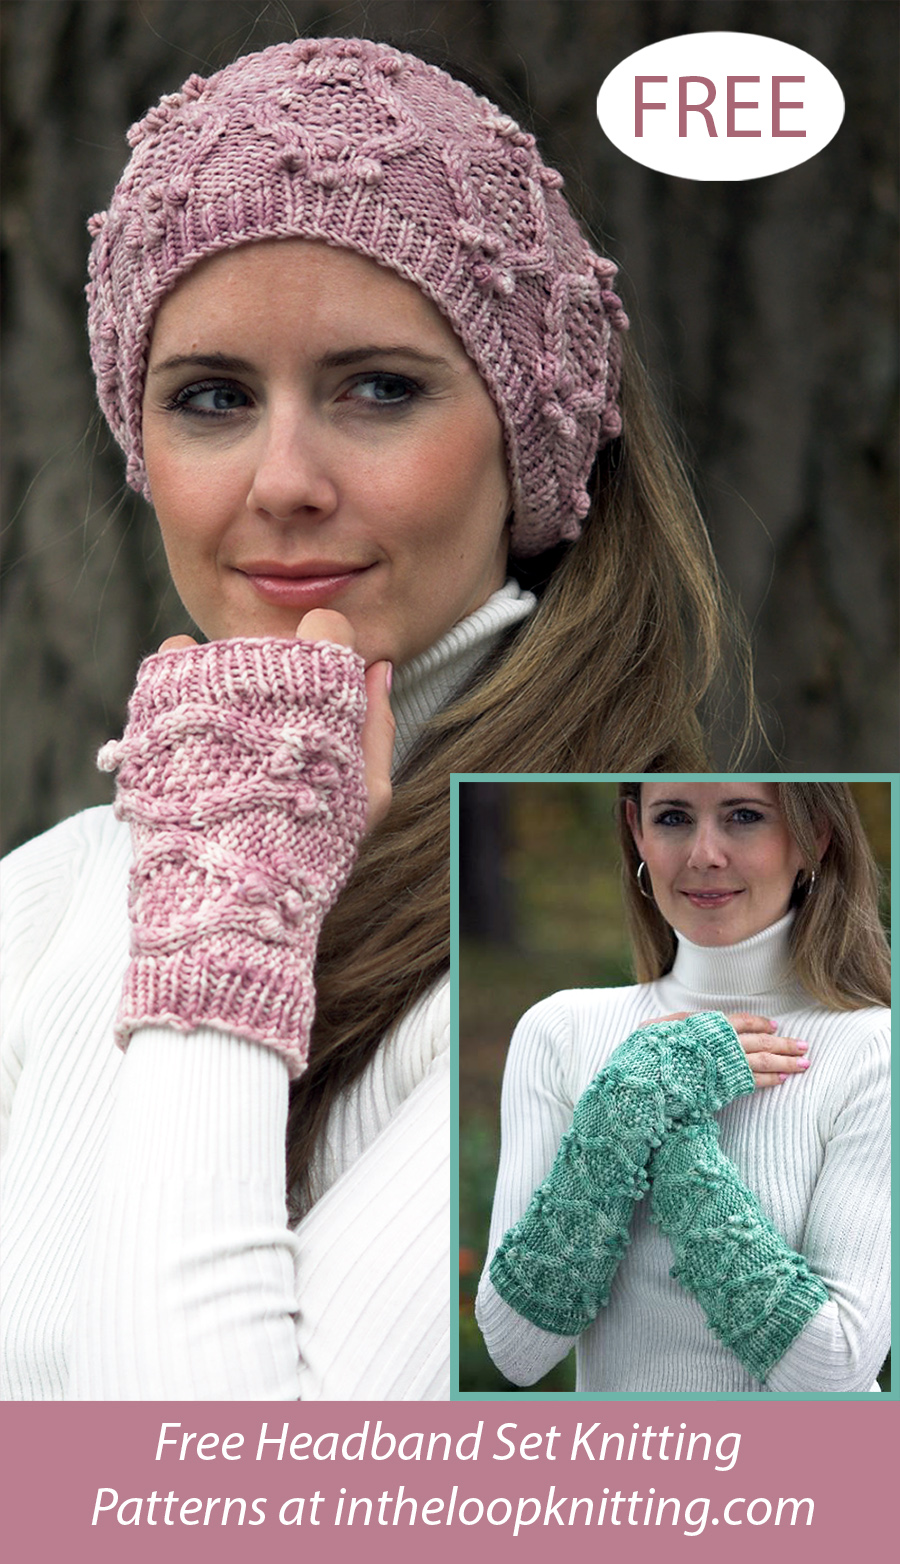 Free Cable Headband and Mitts Set Knitting Pattern